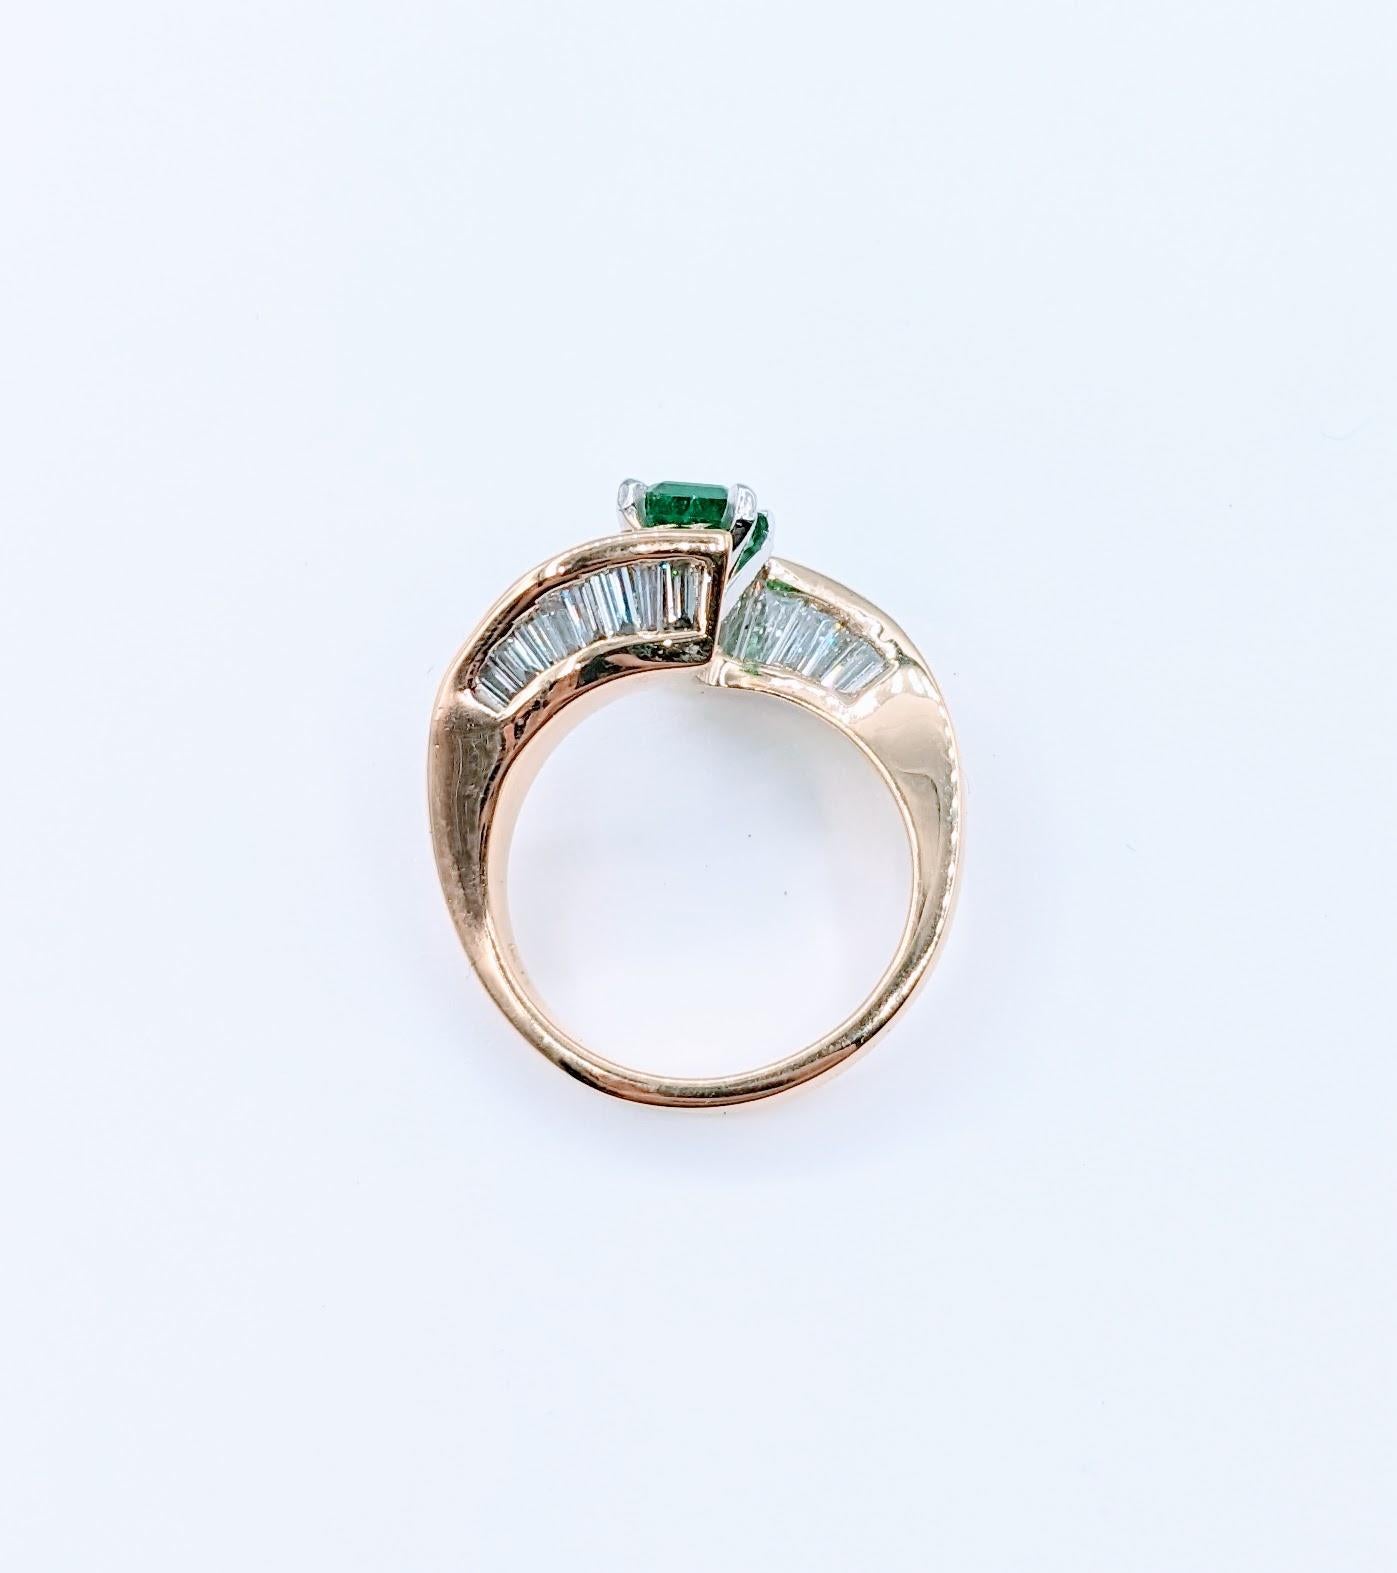 Superb 18k Emerald and Diamond Bypass Ring In Excellent Condition For Sale In Bloomington, MN